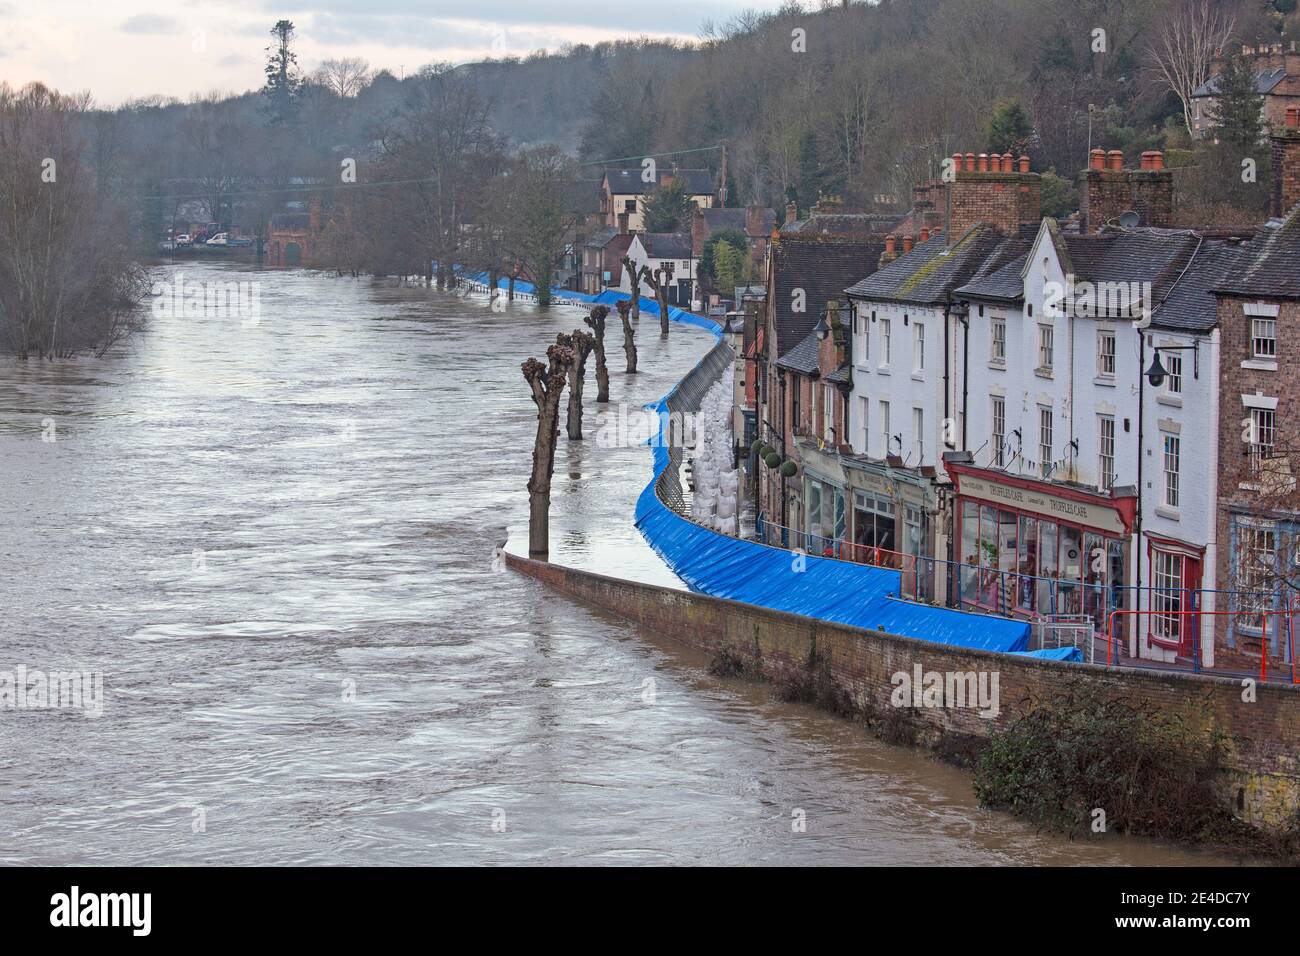 Shropshire, UK. 23rd Jan, 2021. Levels of the River Severn in Shropshire continued to rise overnight, causing sever floods in certain areas. Flood barriers have been erected along The Wharfage in Ironbridge in an attempt to keep the flood waters from entering homes and businesses. Credit: Rob Carter/Alamy Live News Stock Photo